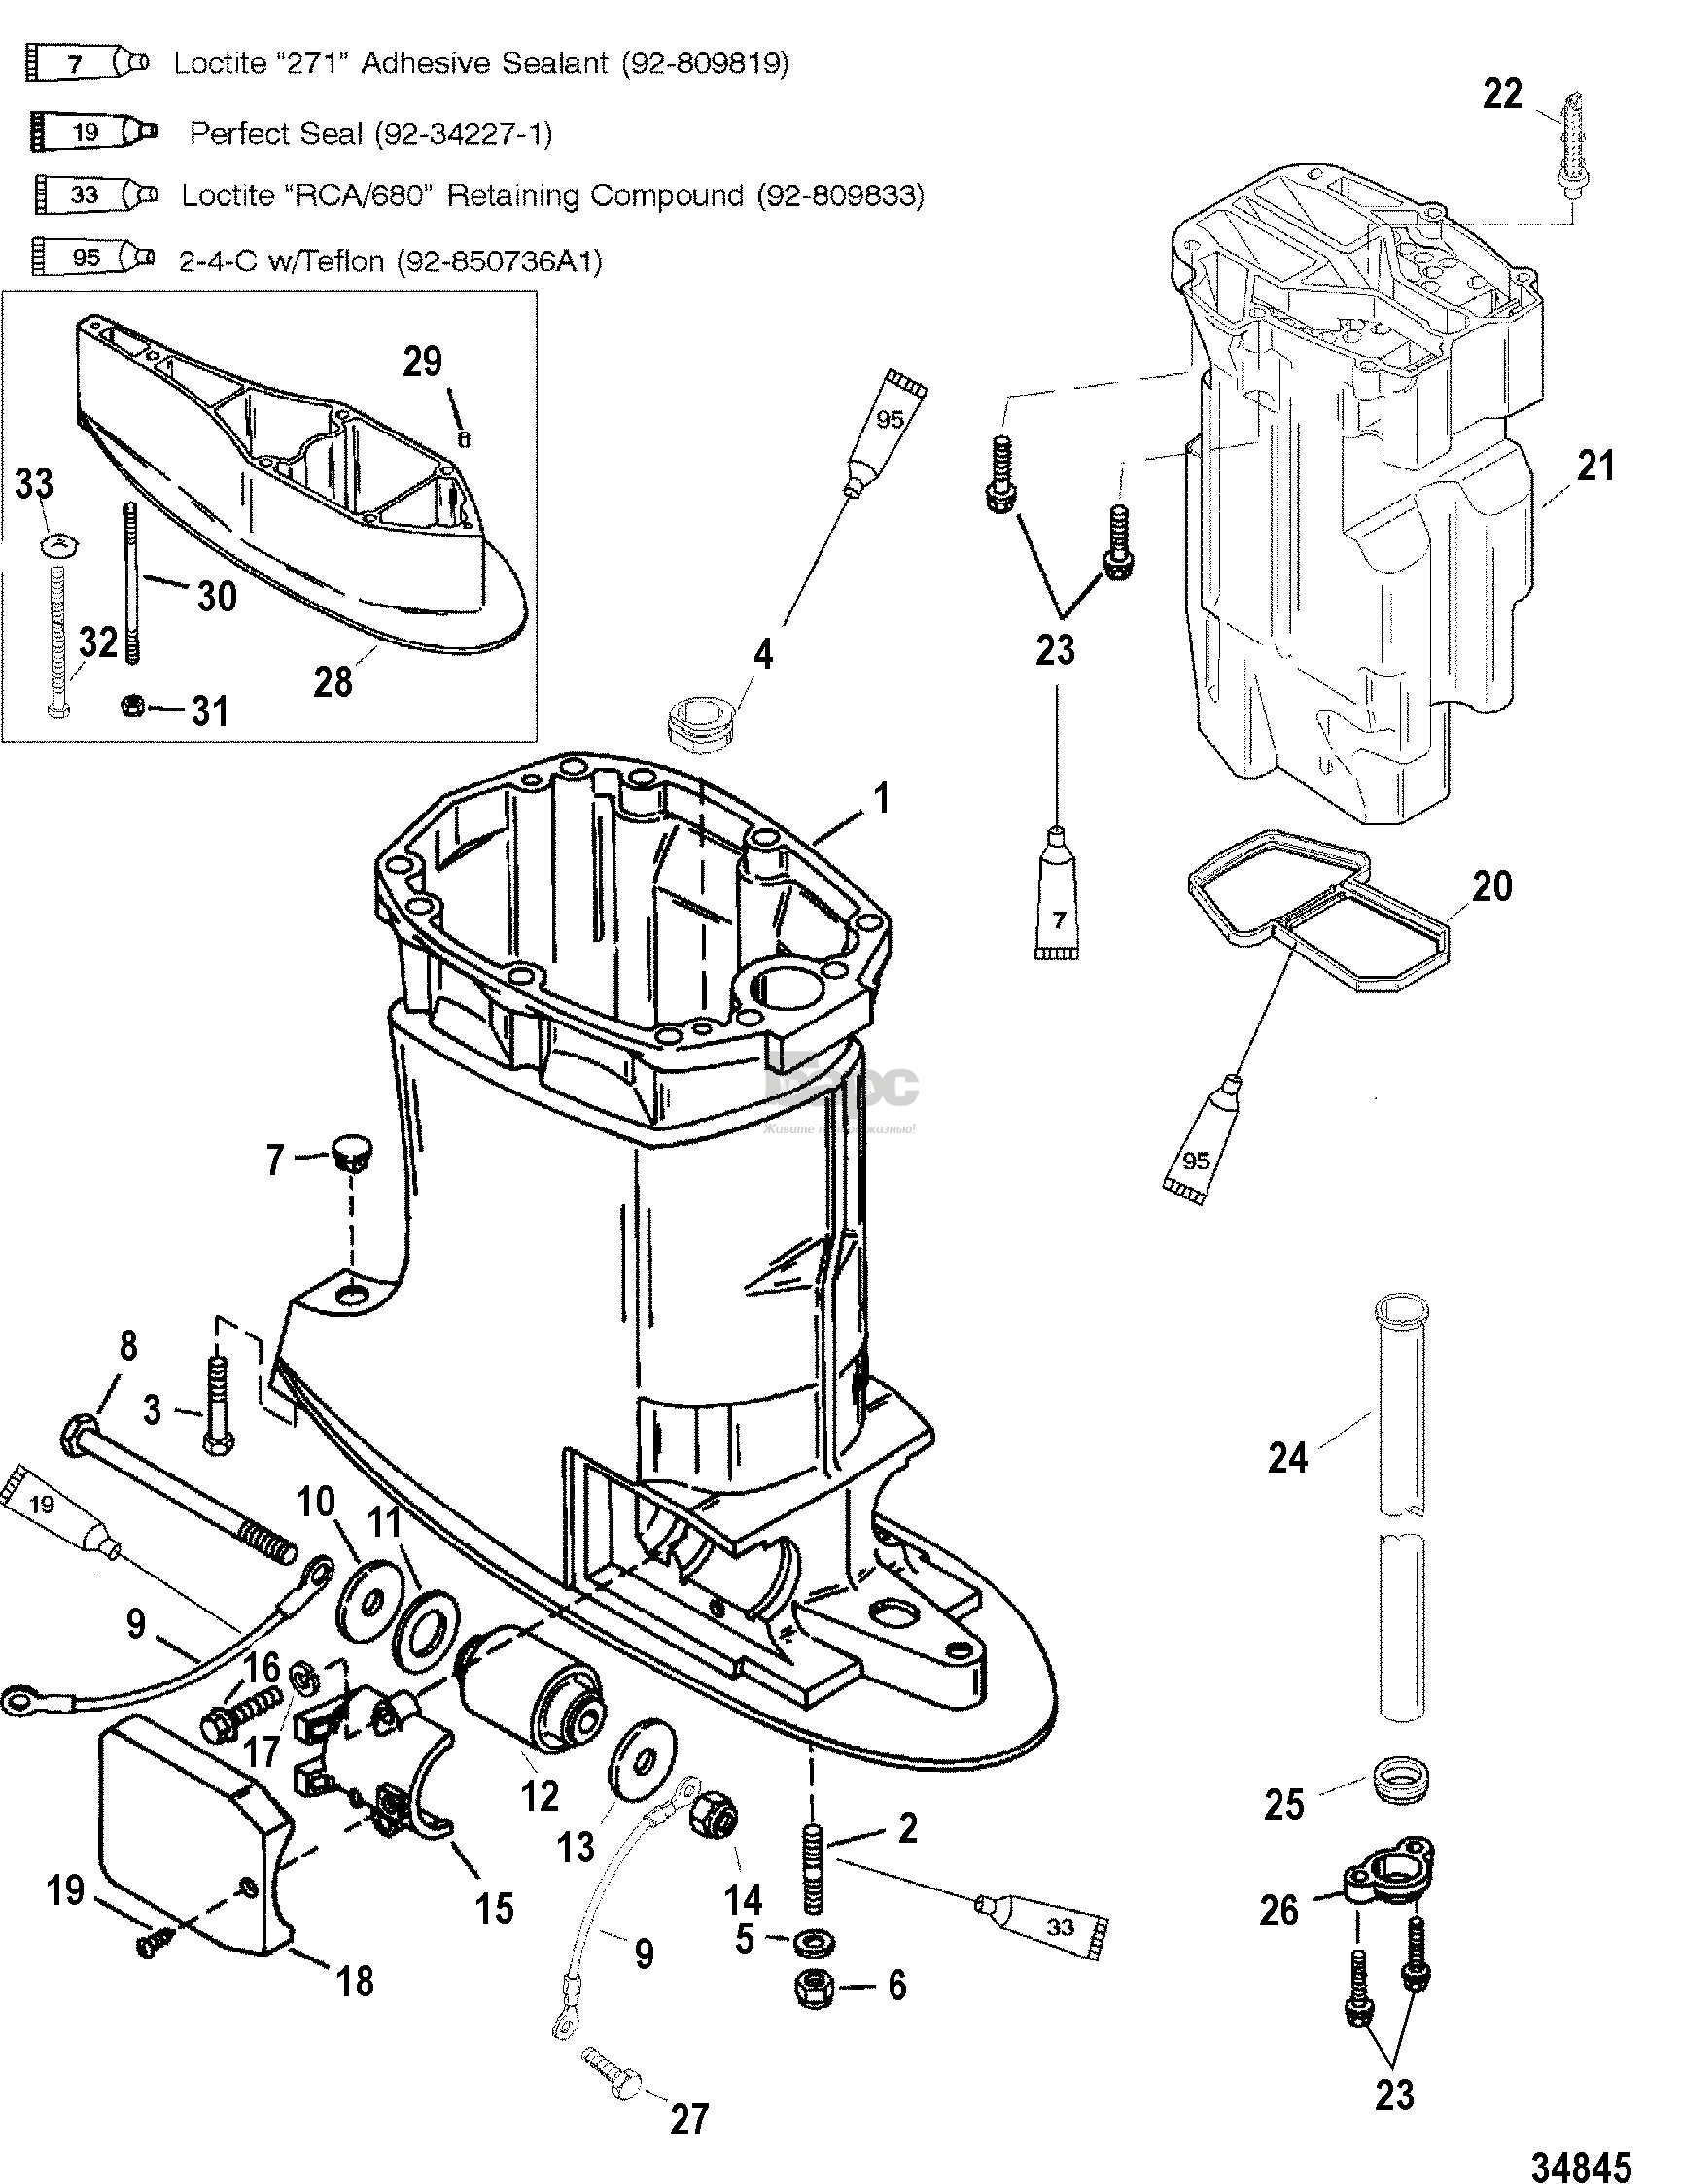 Driveshaft Housing and Exhaust Tube